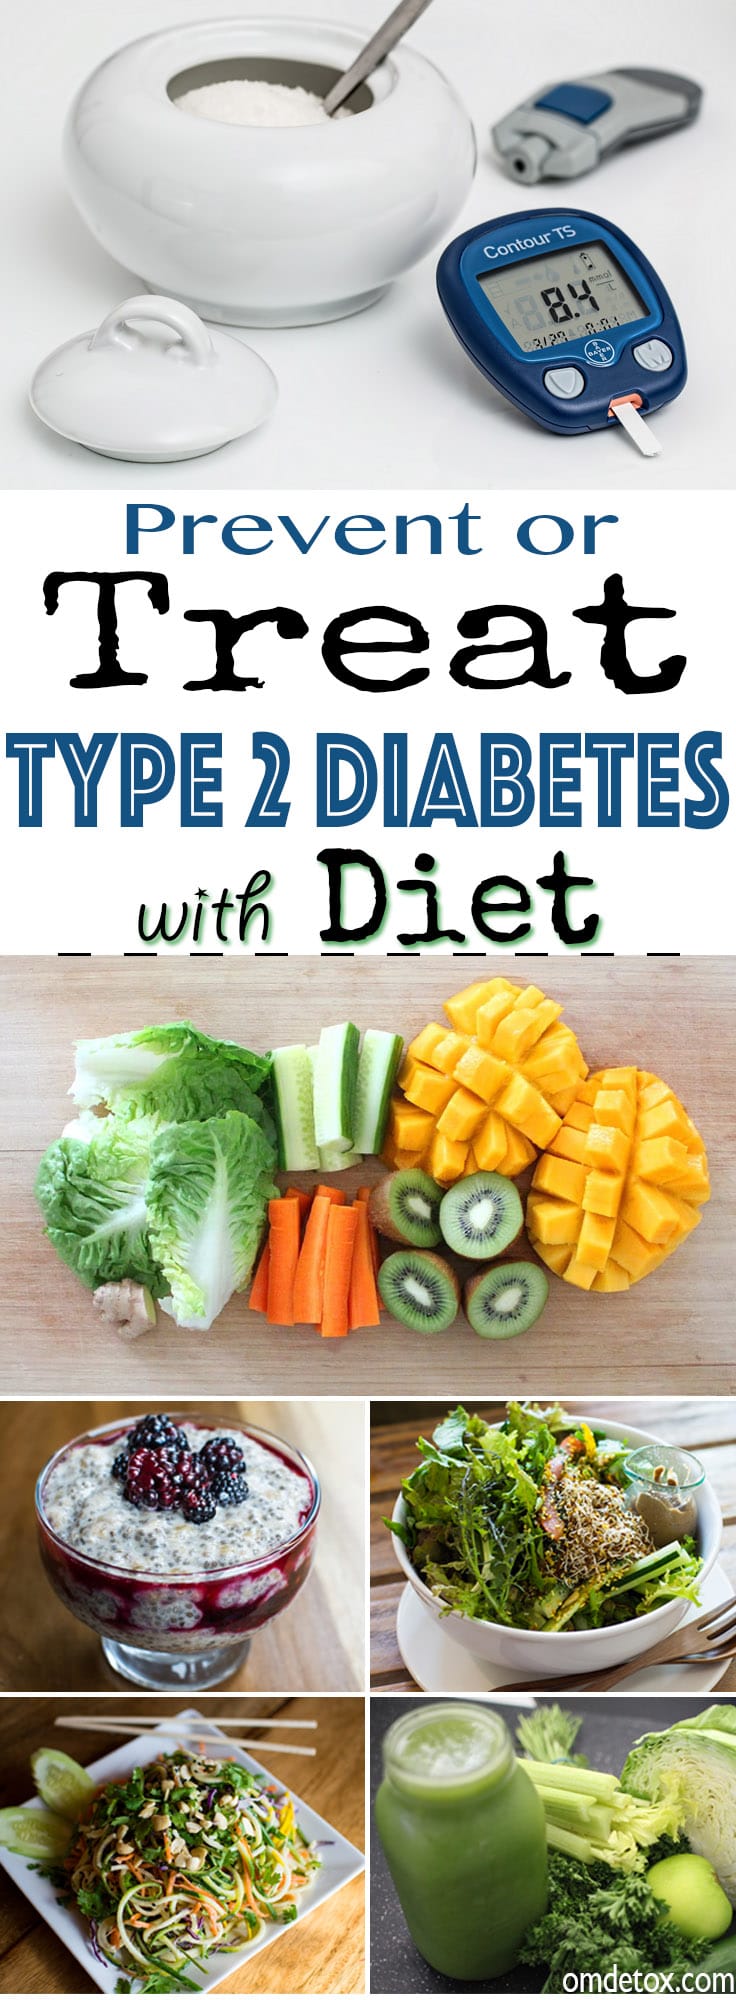 How to treat type 2 Diabetes with Diet. Yes you can treat Diabetes with food, discover how her. Milton did it, so can you.